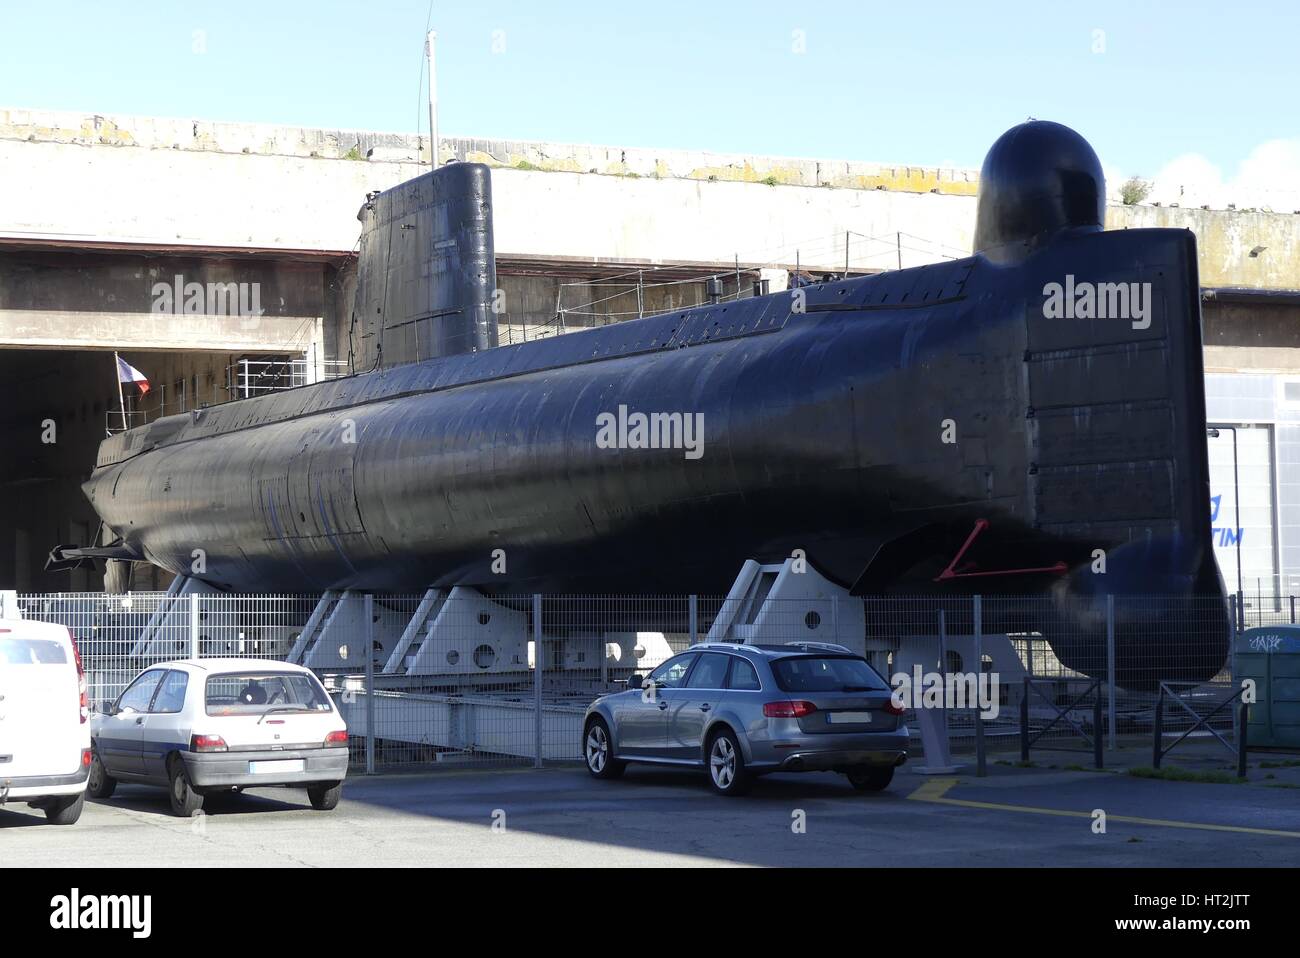 View of a Submarine exhibited on shore at the previous World War 2 German submarine base of Lorient, Brittany  France Stock Photo